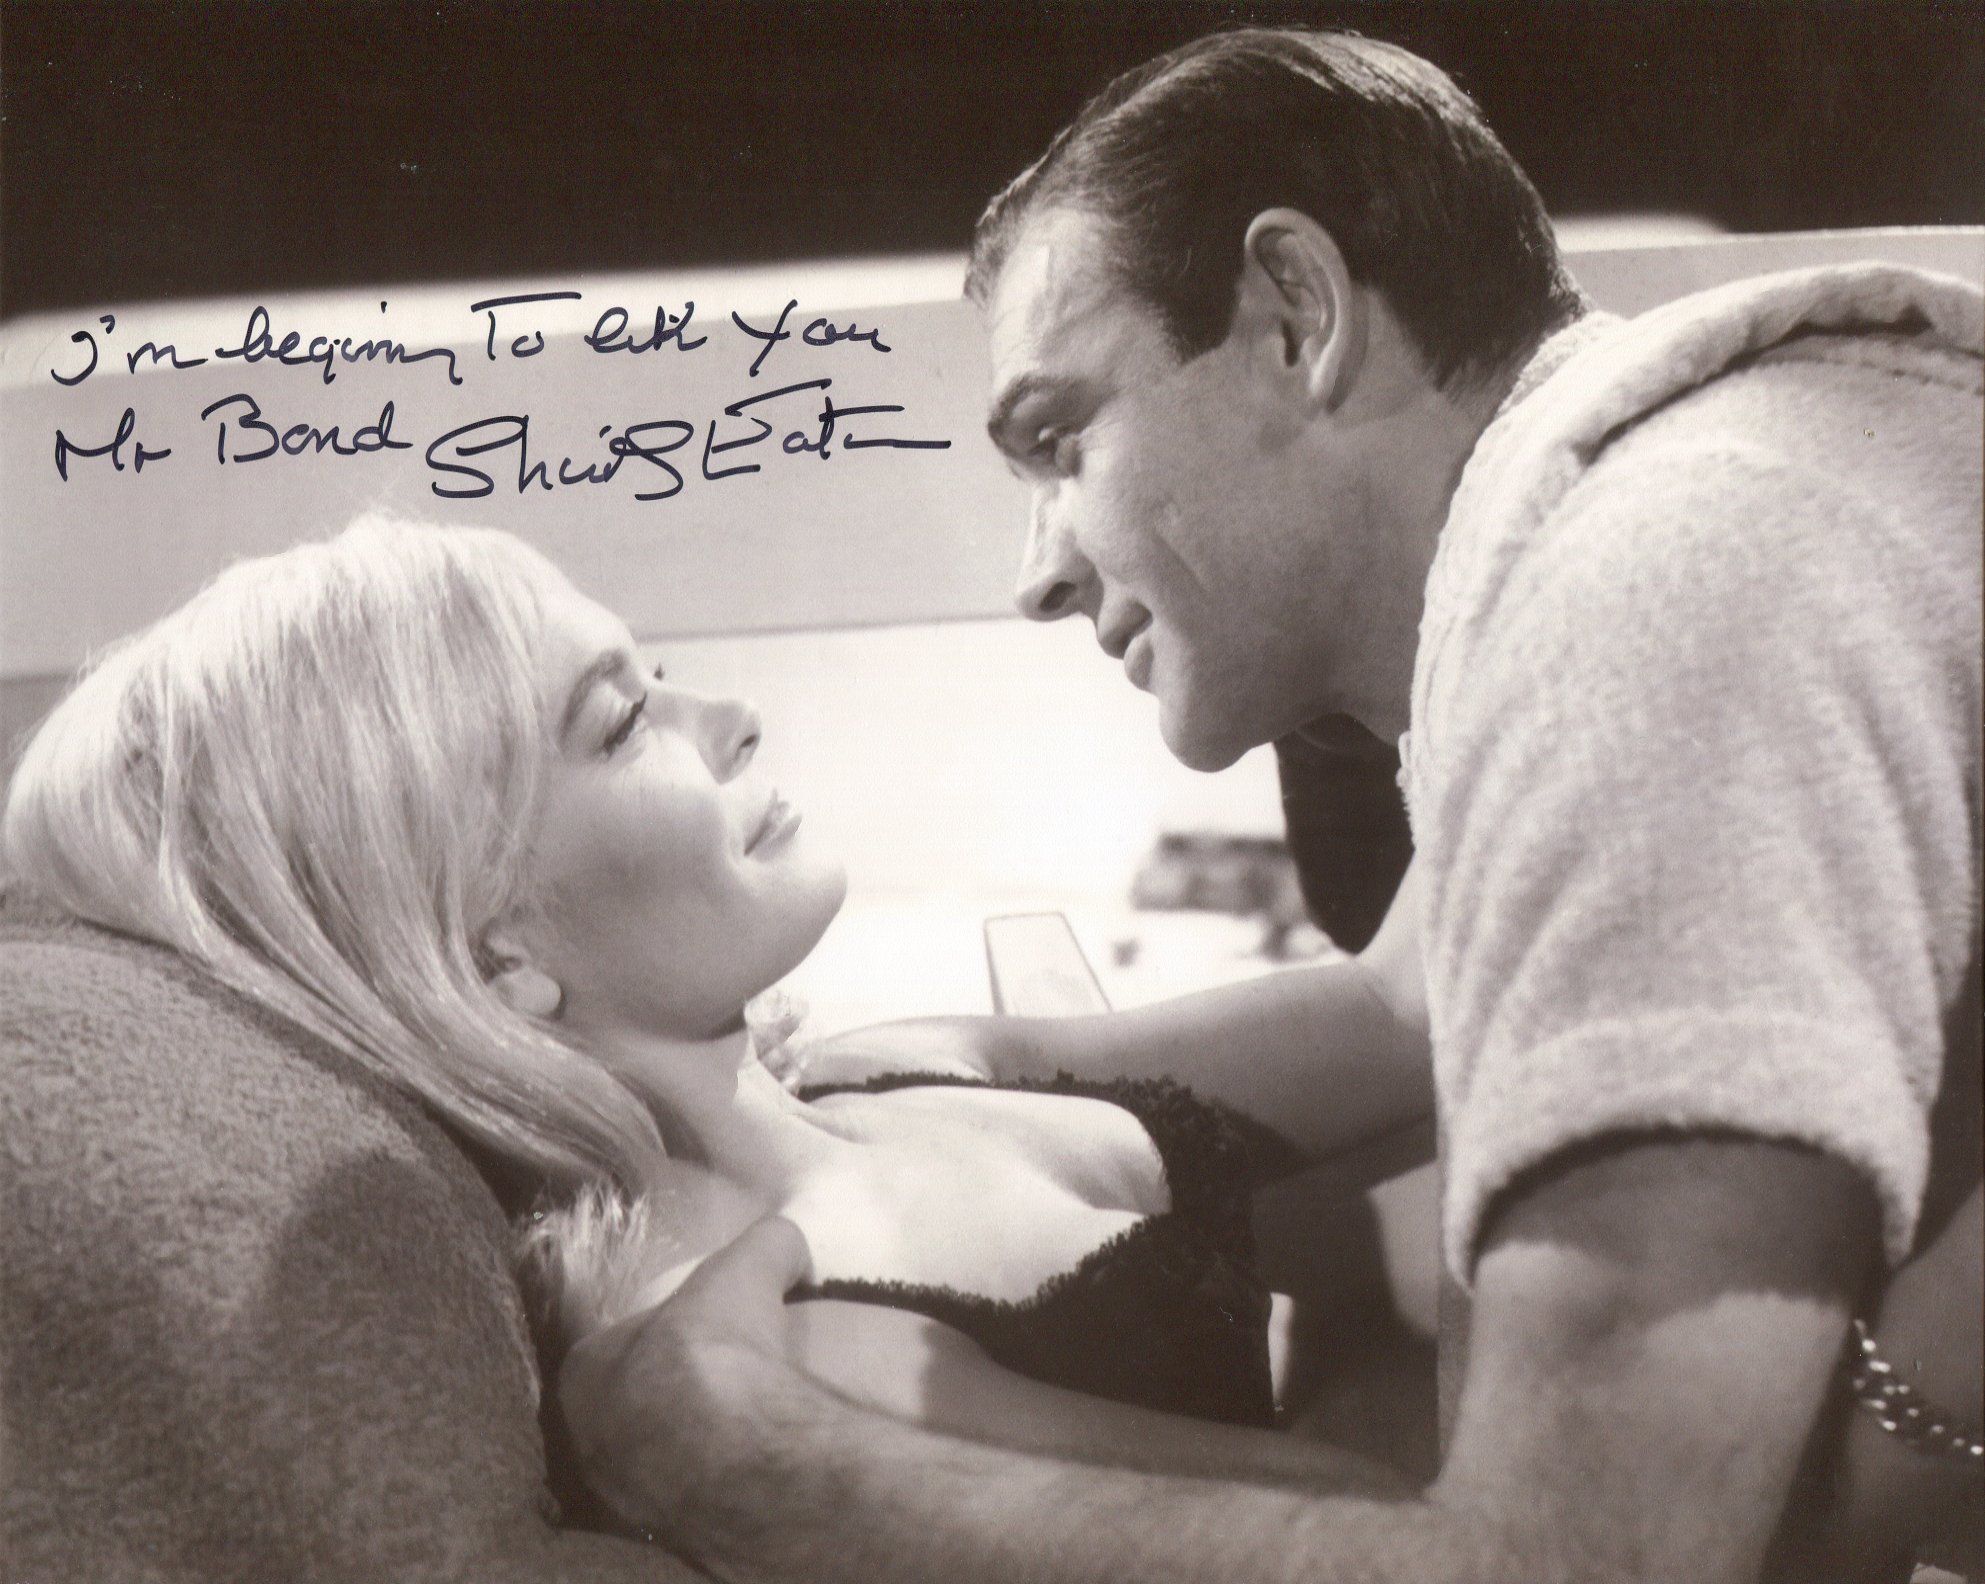 007 Bond girl, lovely 8x10 photo signed by Goldfinger actress Shirley Eaton who has also added her